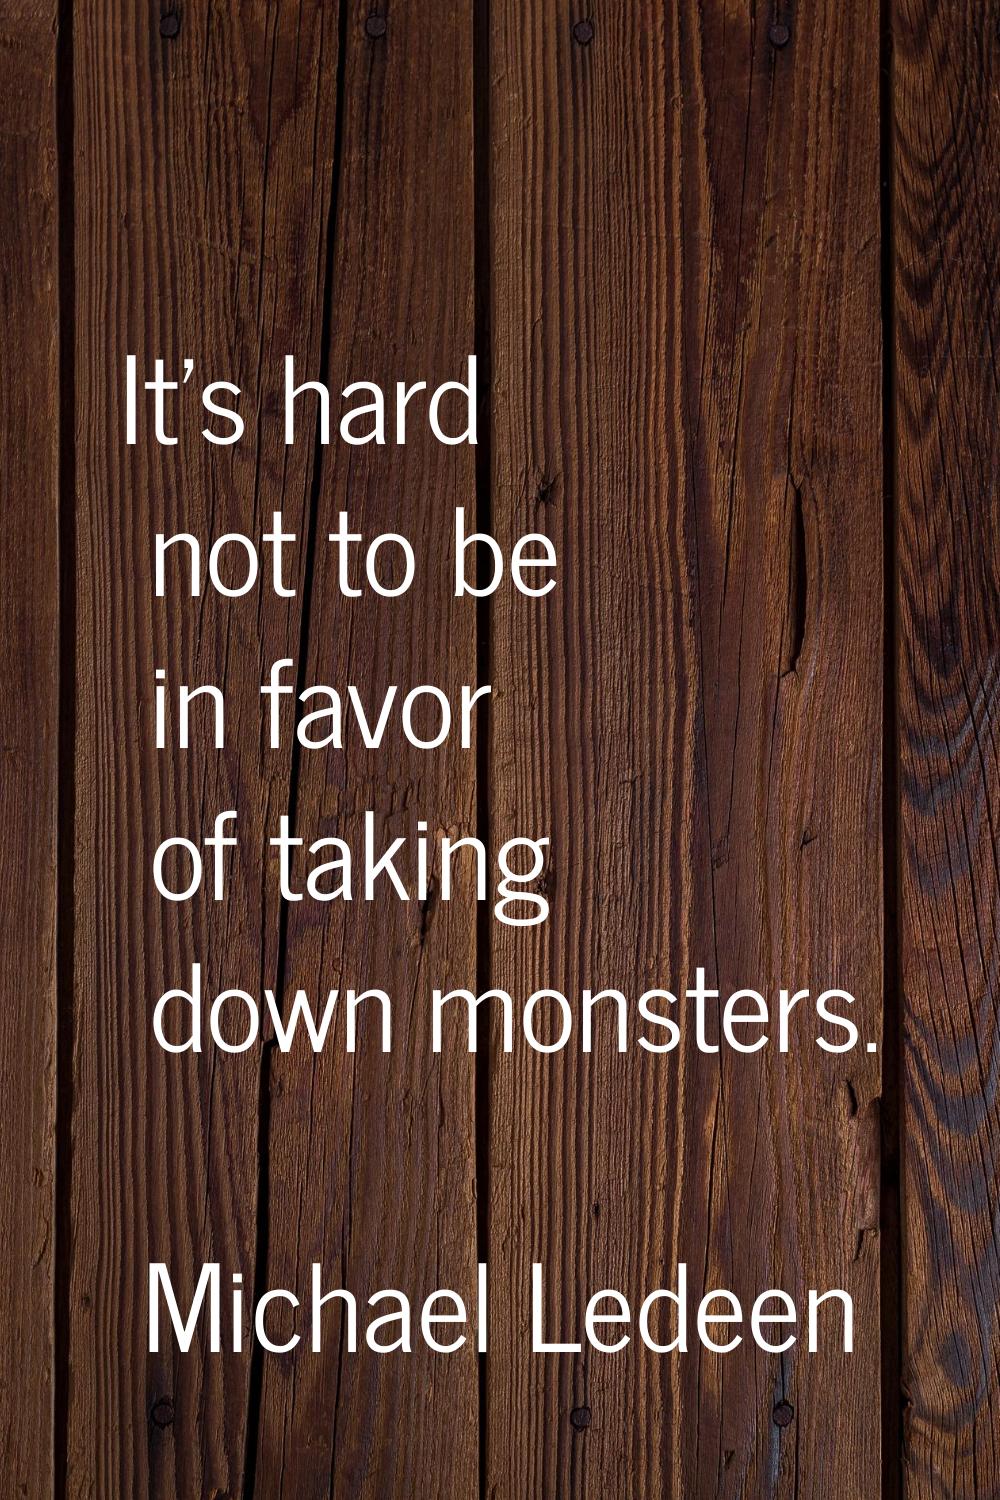 It's hard not to be in favor of taking down monsters.